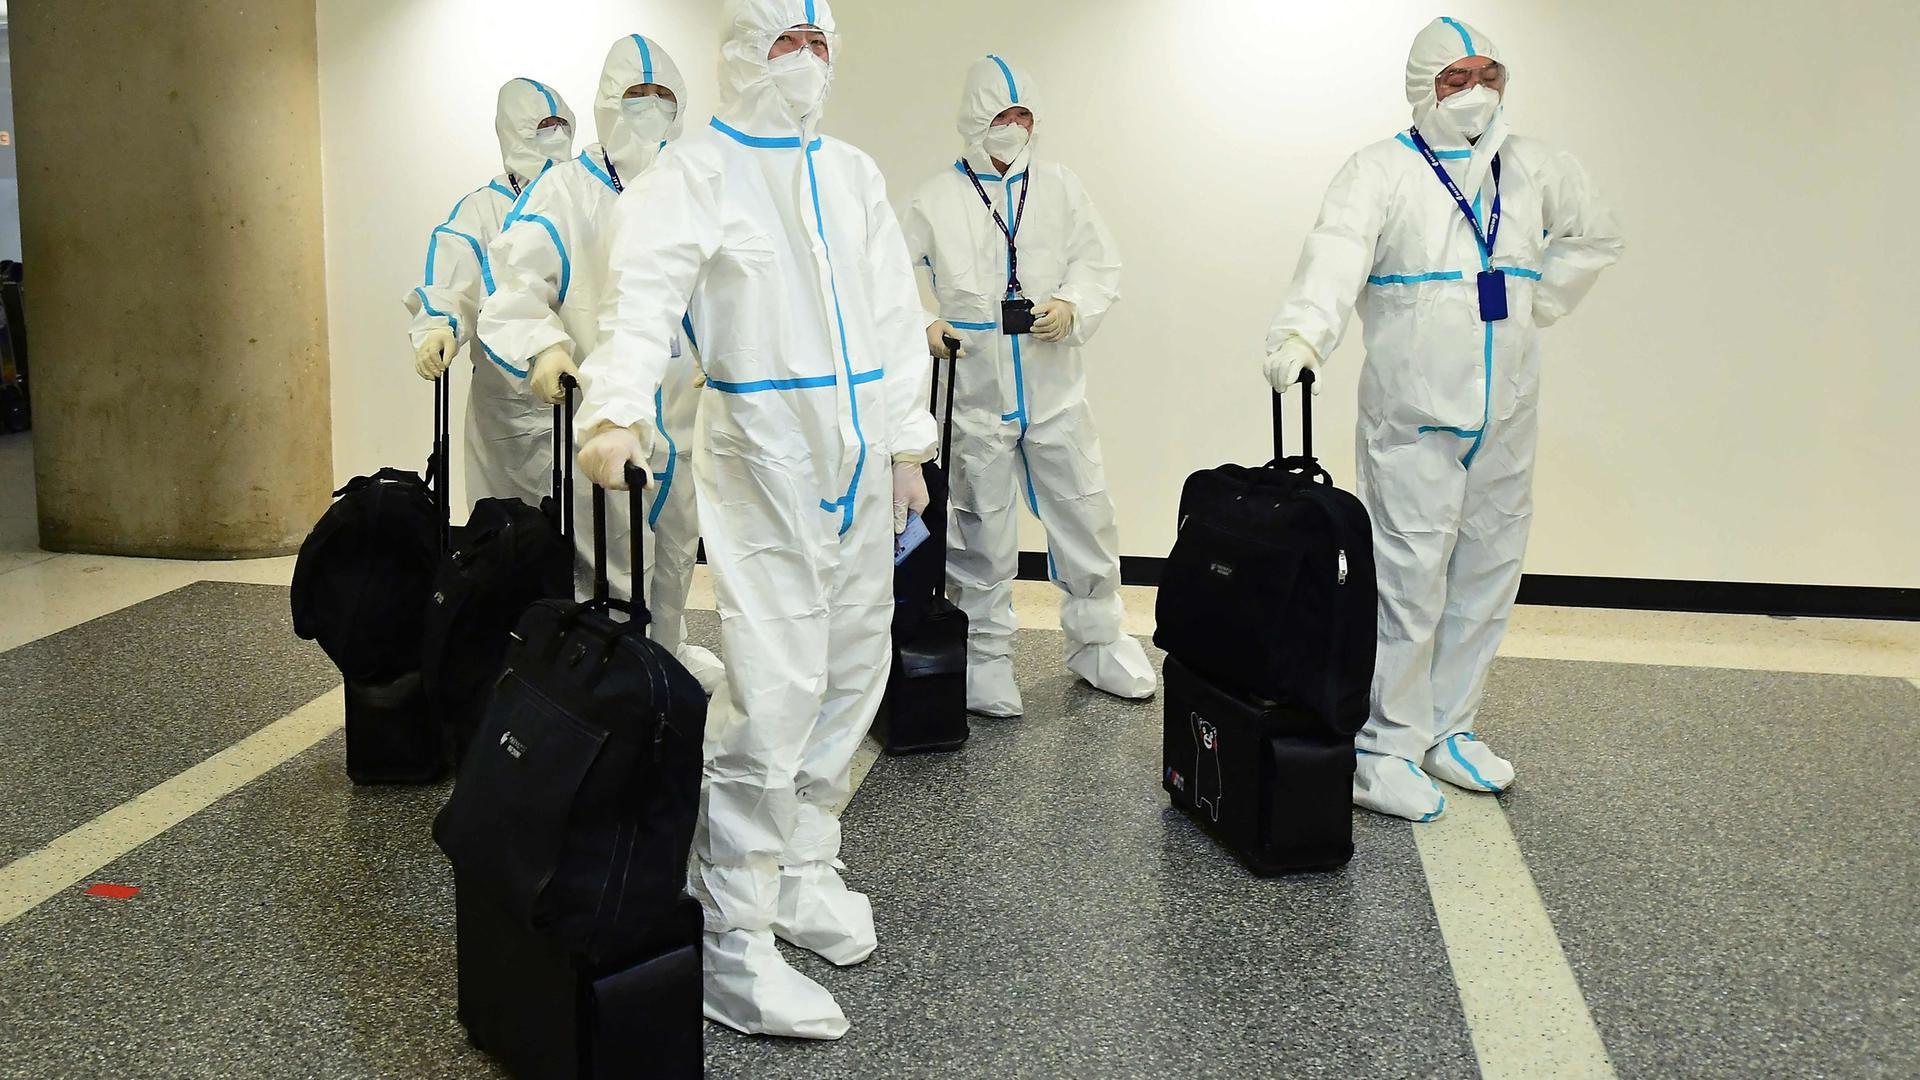 Flight crew from Air China arrive in hazmat suits in the international terminal at Los Angeles International Airport, 3 December, 2021.